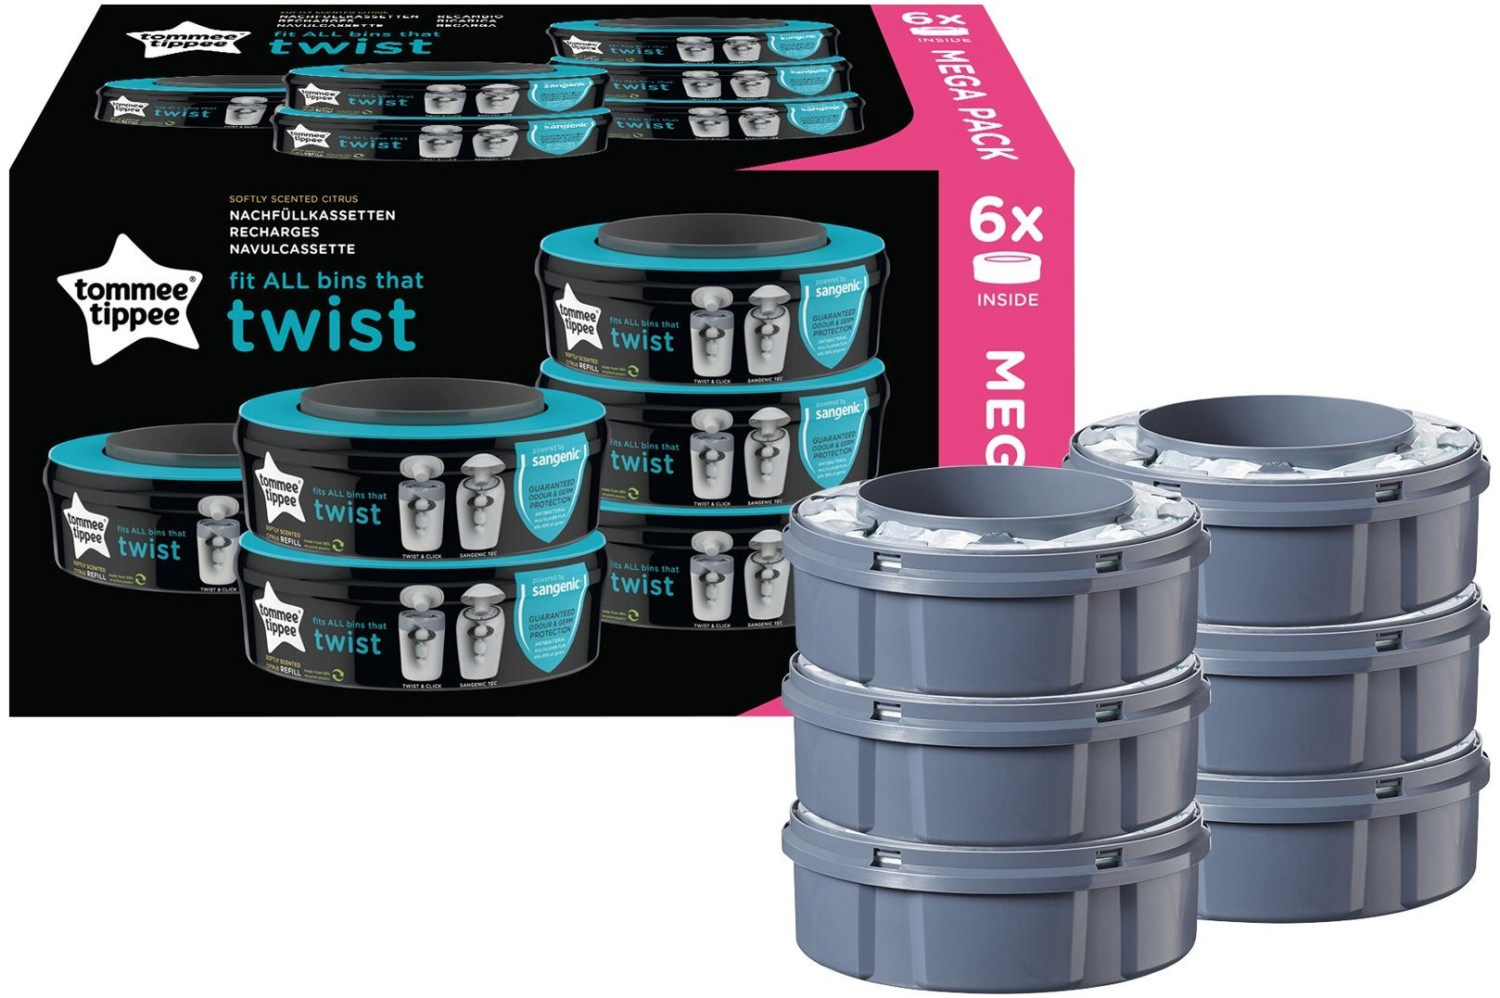 Tommee Tippee Recambios Contenedor Pañales Sangenic Twist&Click 13